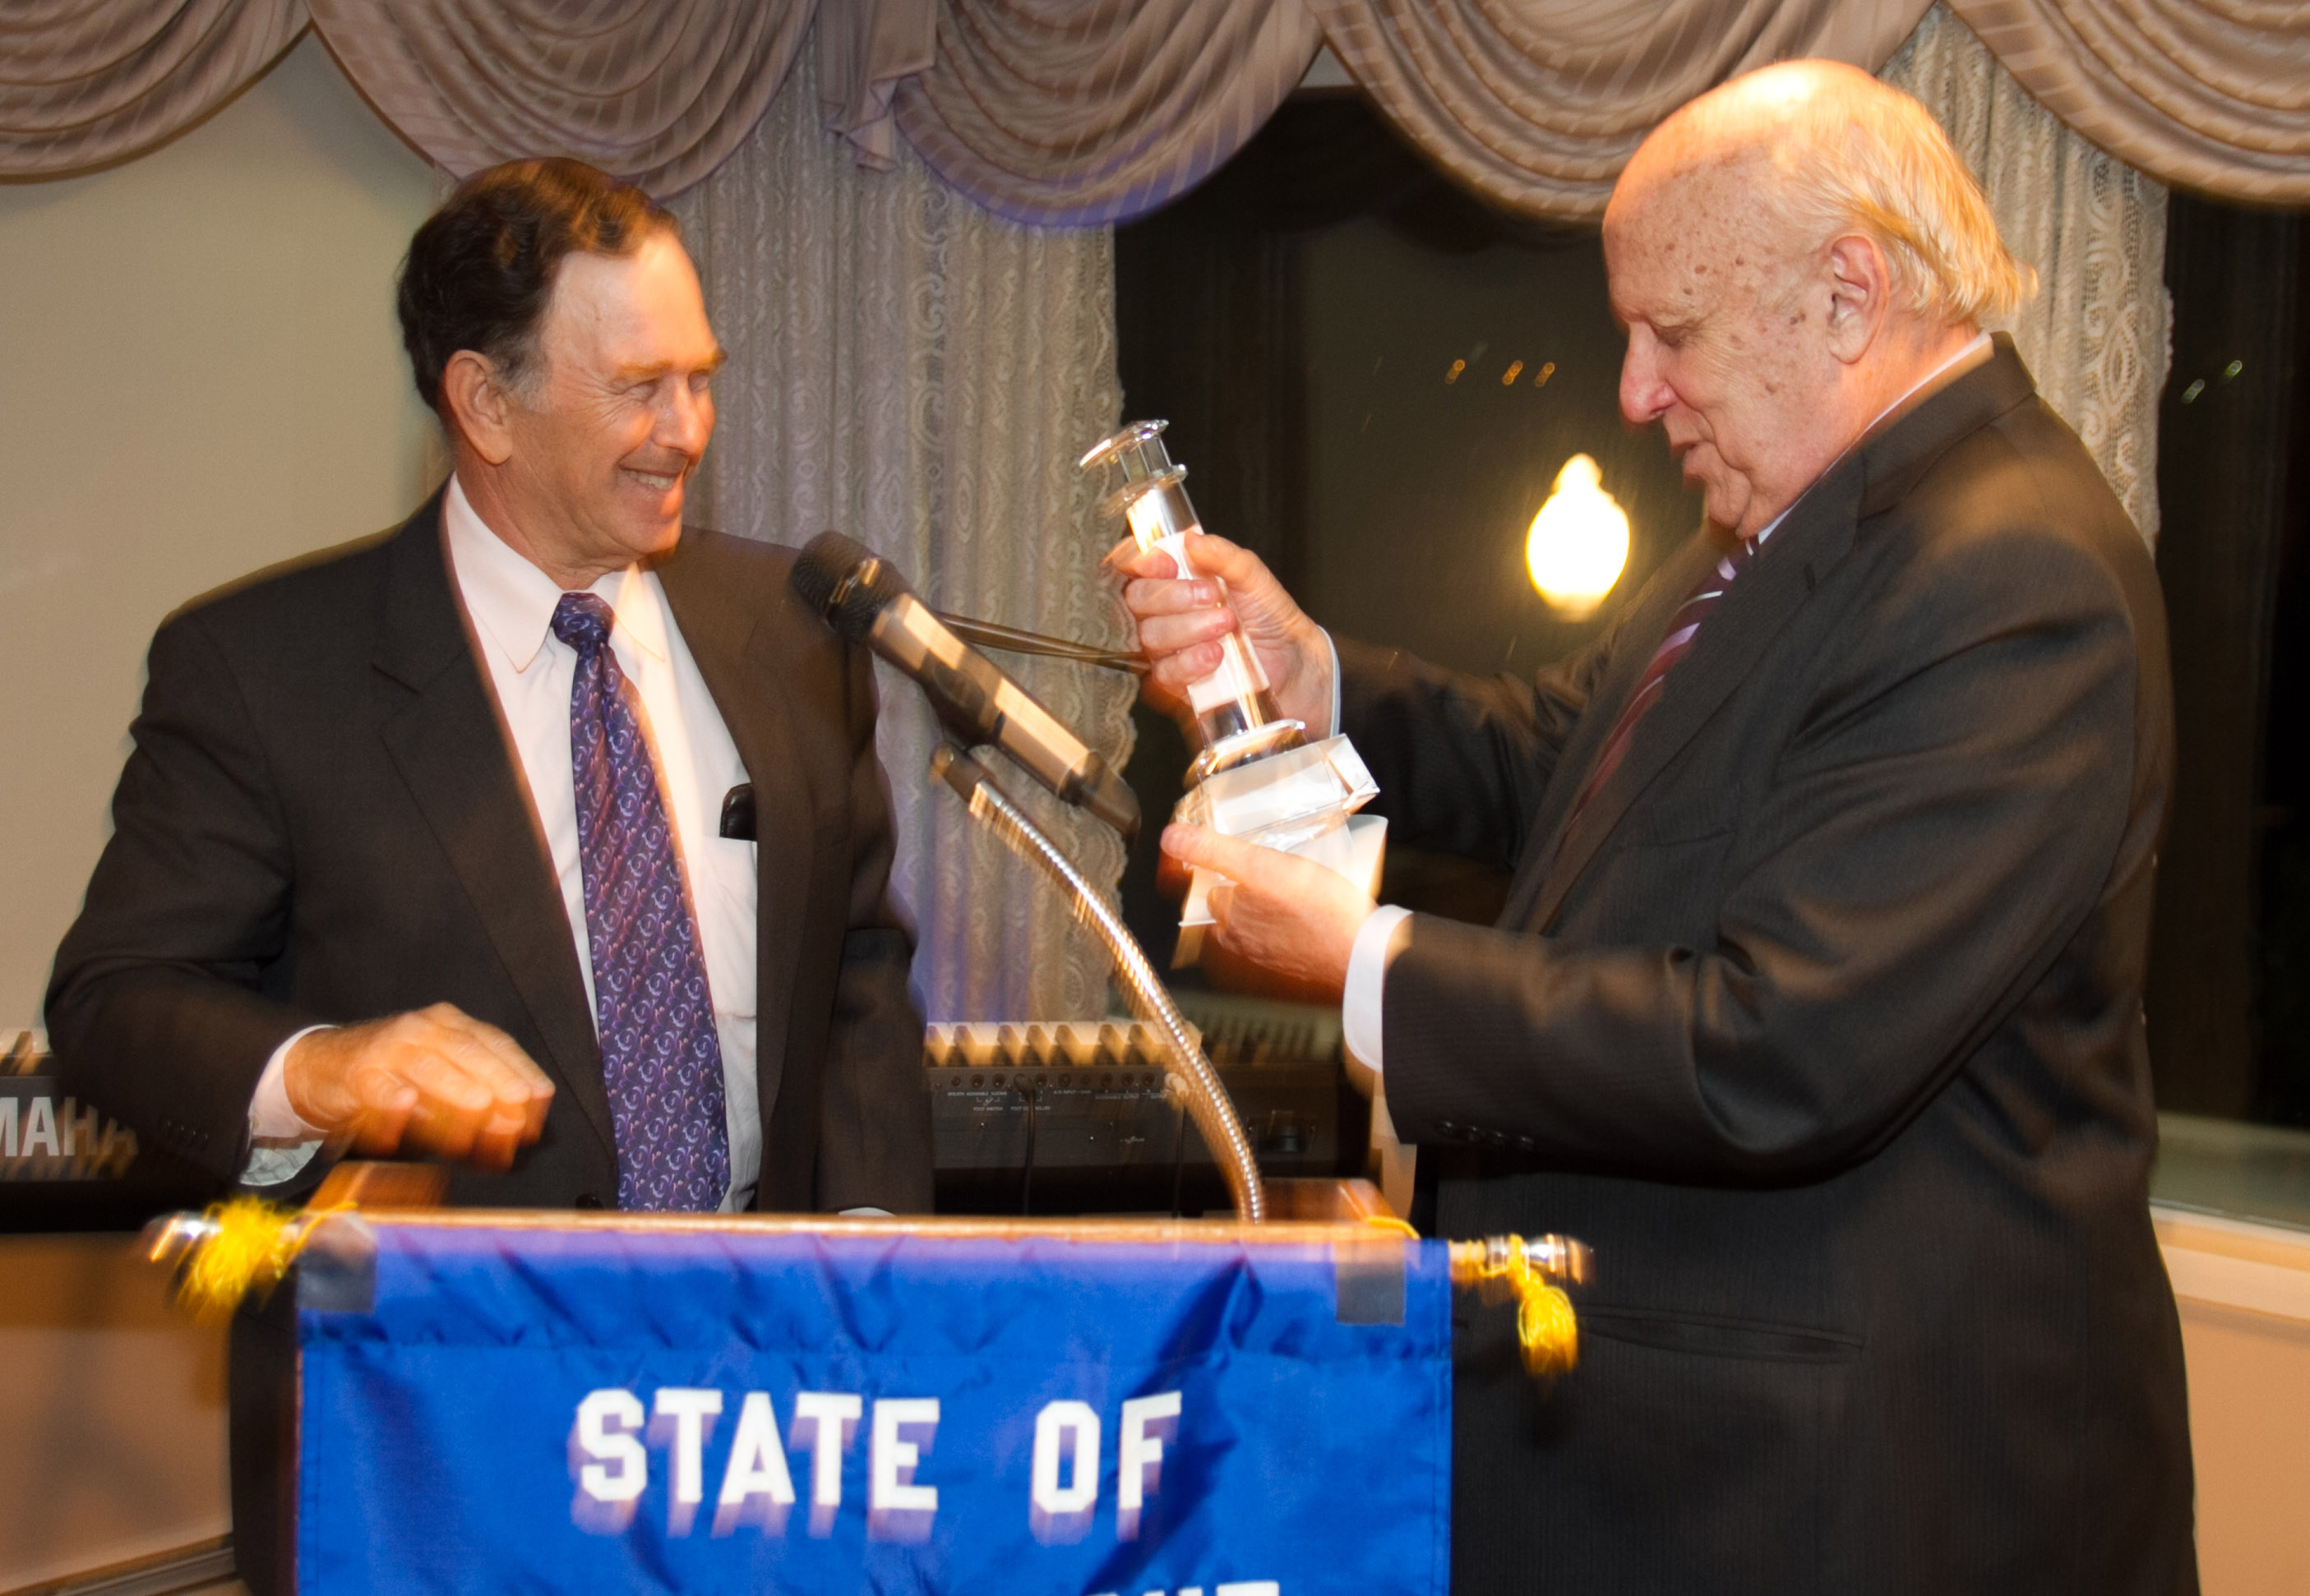 CFOG President and Board Chairman, Gary Gold, presents the Walter Cronkite Award to Attorney Floyd Abrams, during the dinner ce